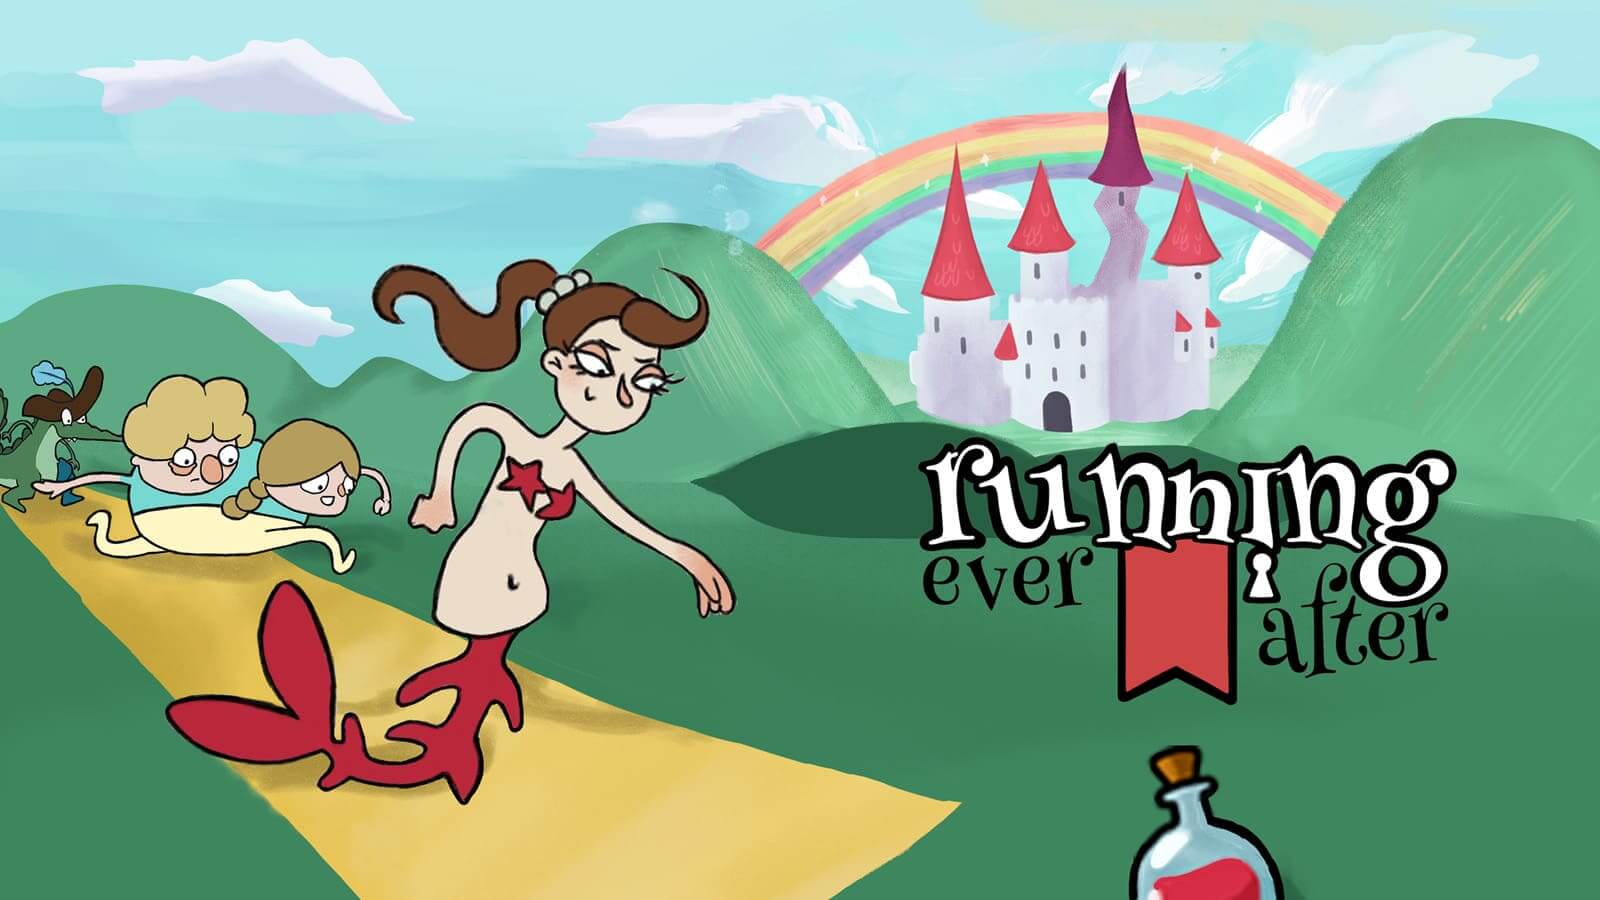 Multiple fairy tale characters cursed by an evil witch race along the path towards the potion to reclaim their happily ever after, with a beautiful castle with red roofs framed by a rainbow in the background.